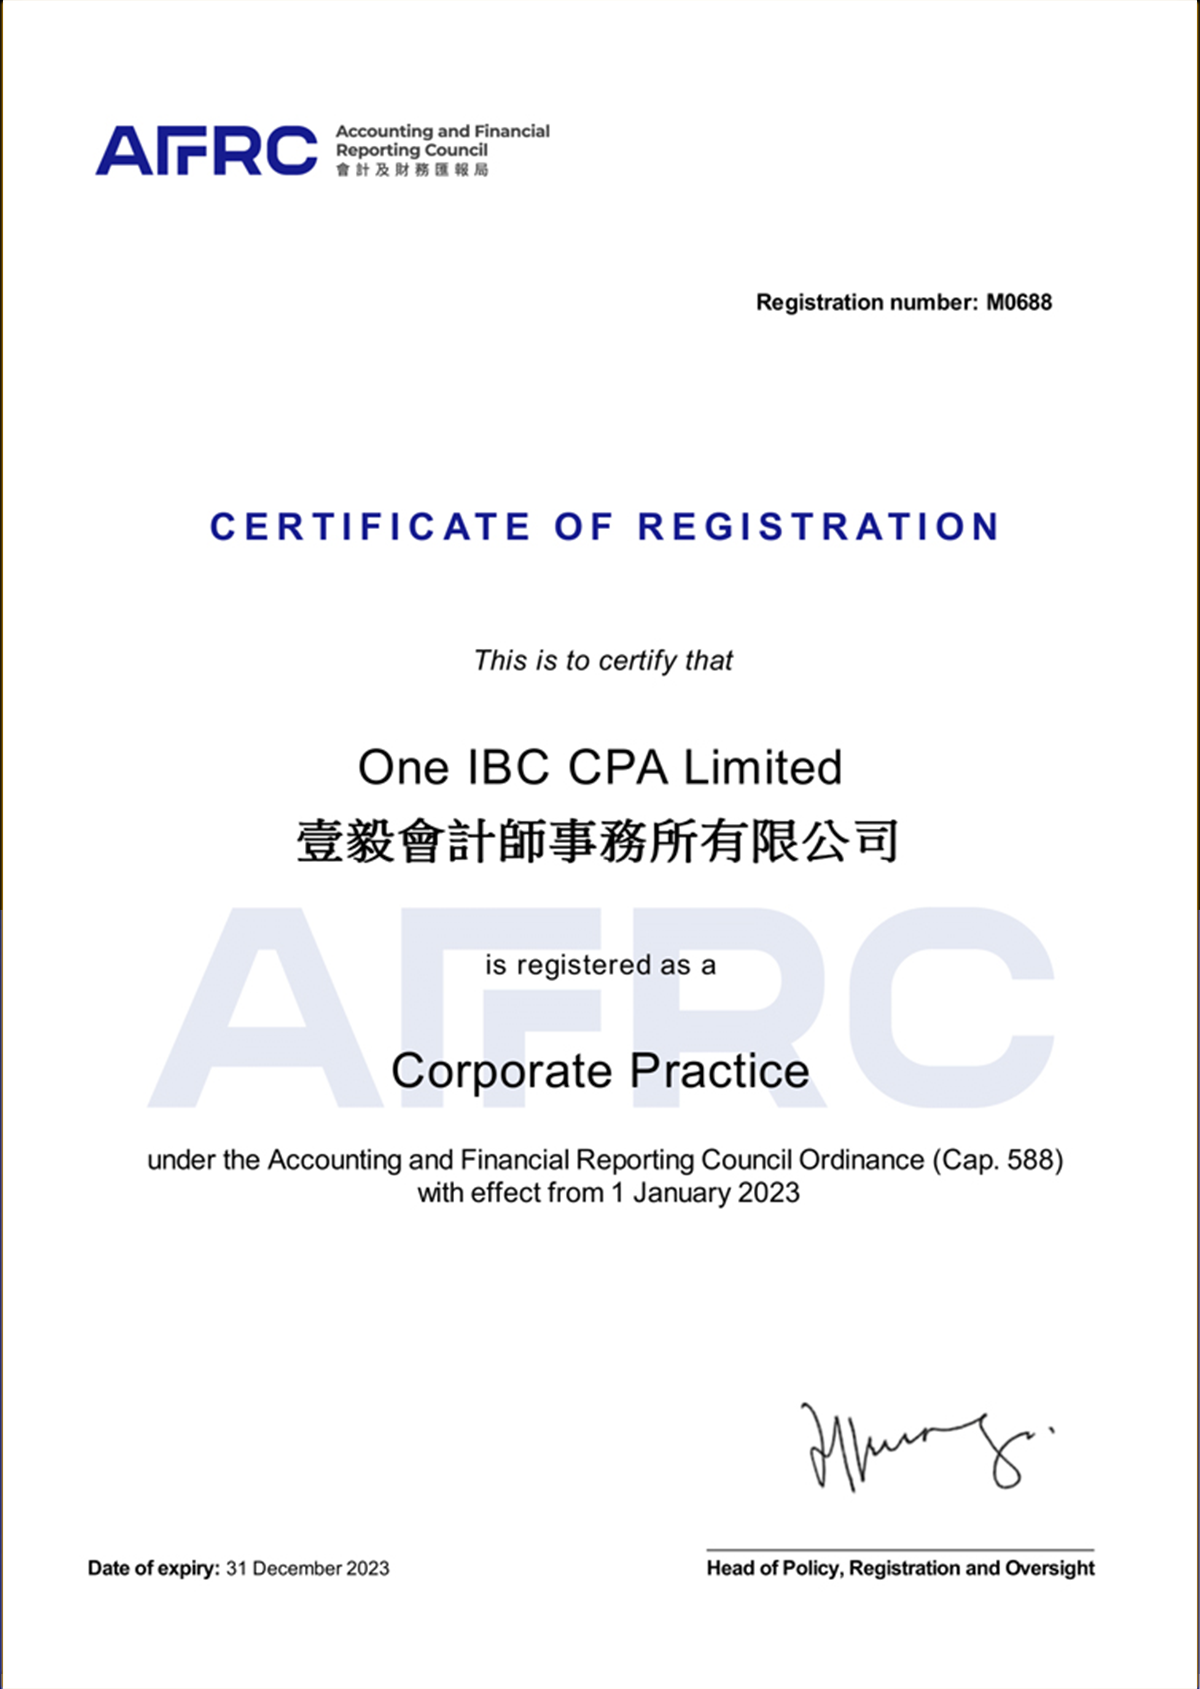 One IBC CPA Limited – Owning a corporate practice licence to practise public accountancy in Hong Kong